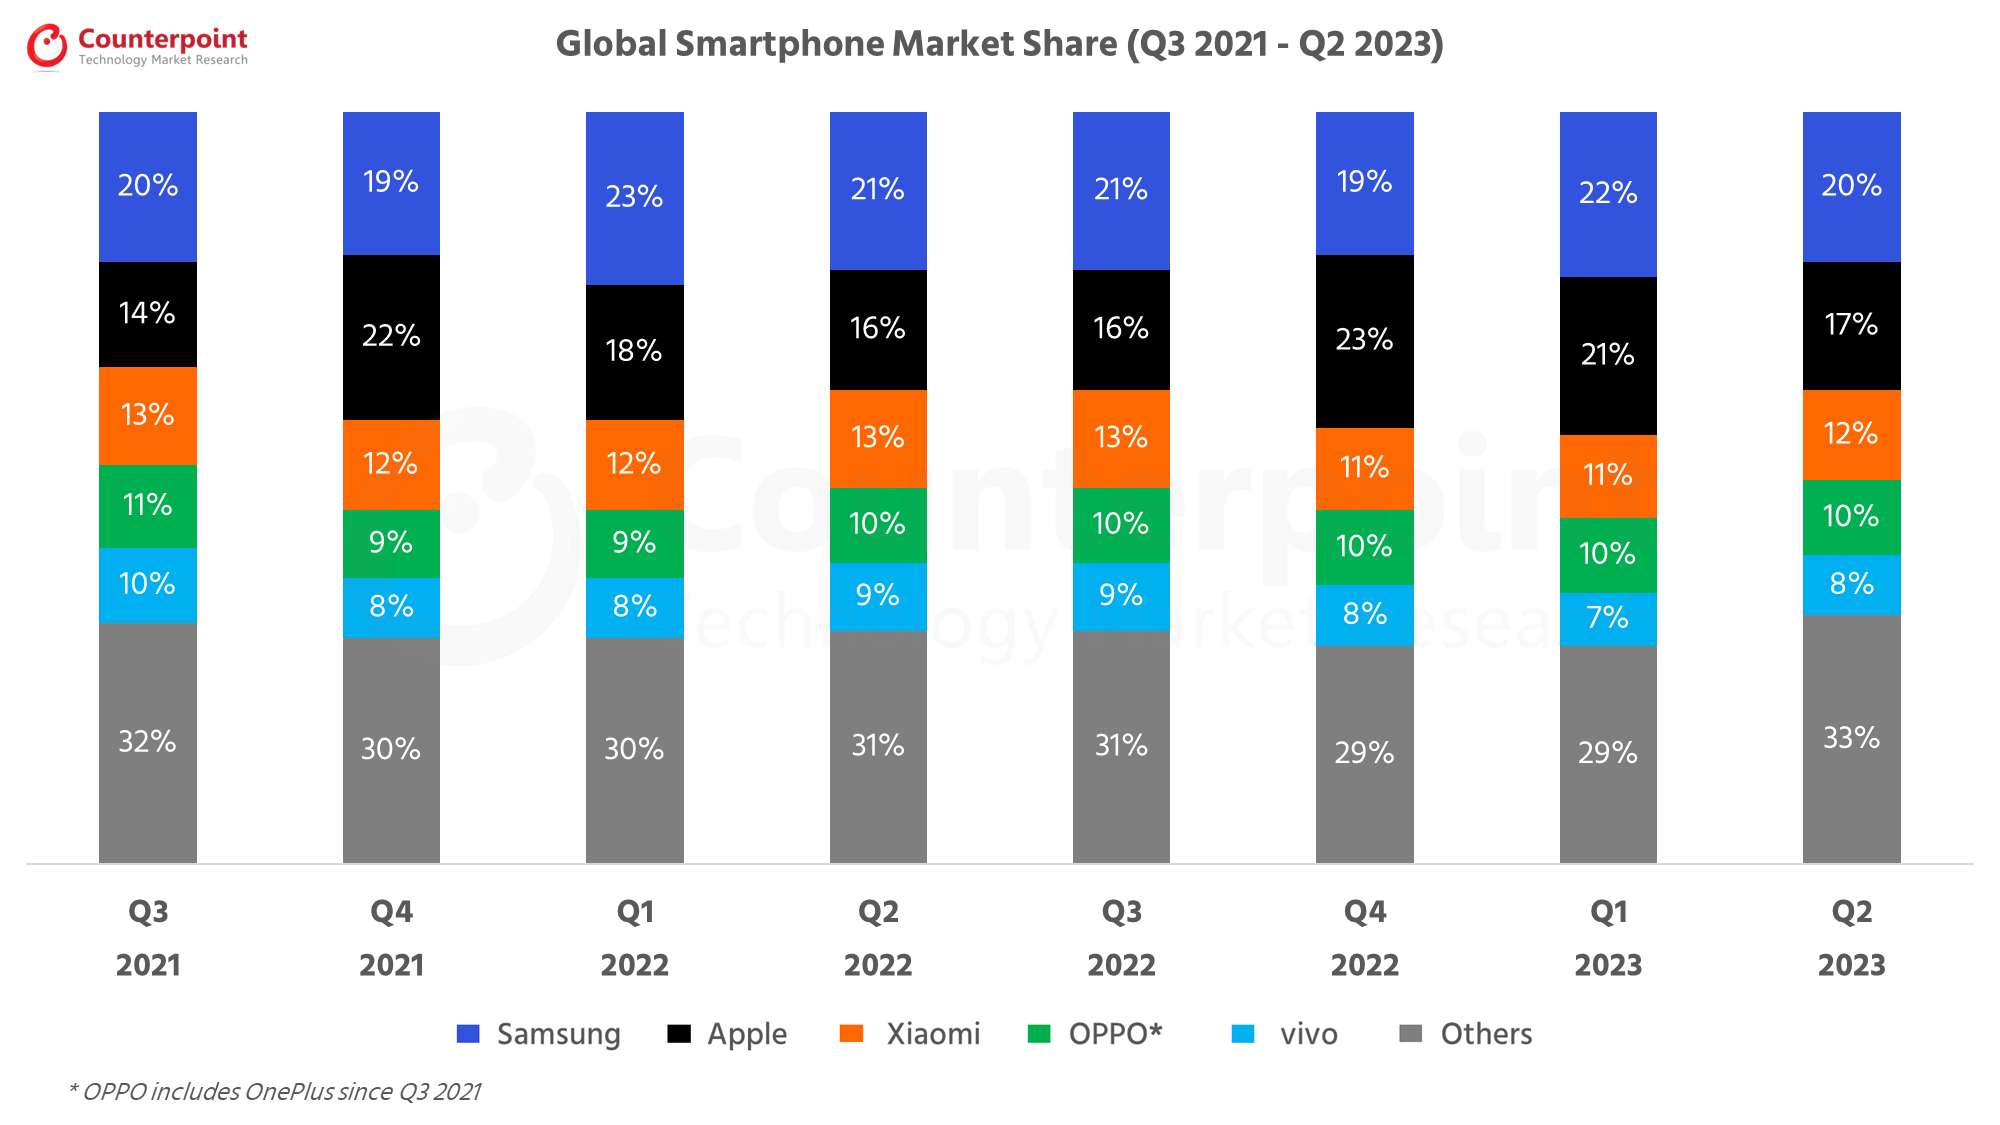 Counterpoint Research Global Smartphone Market Share Q2 2023